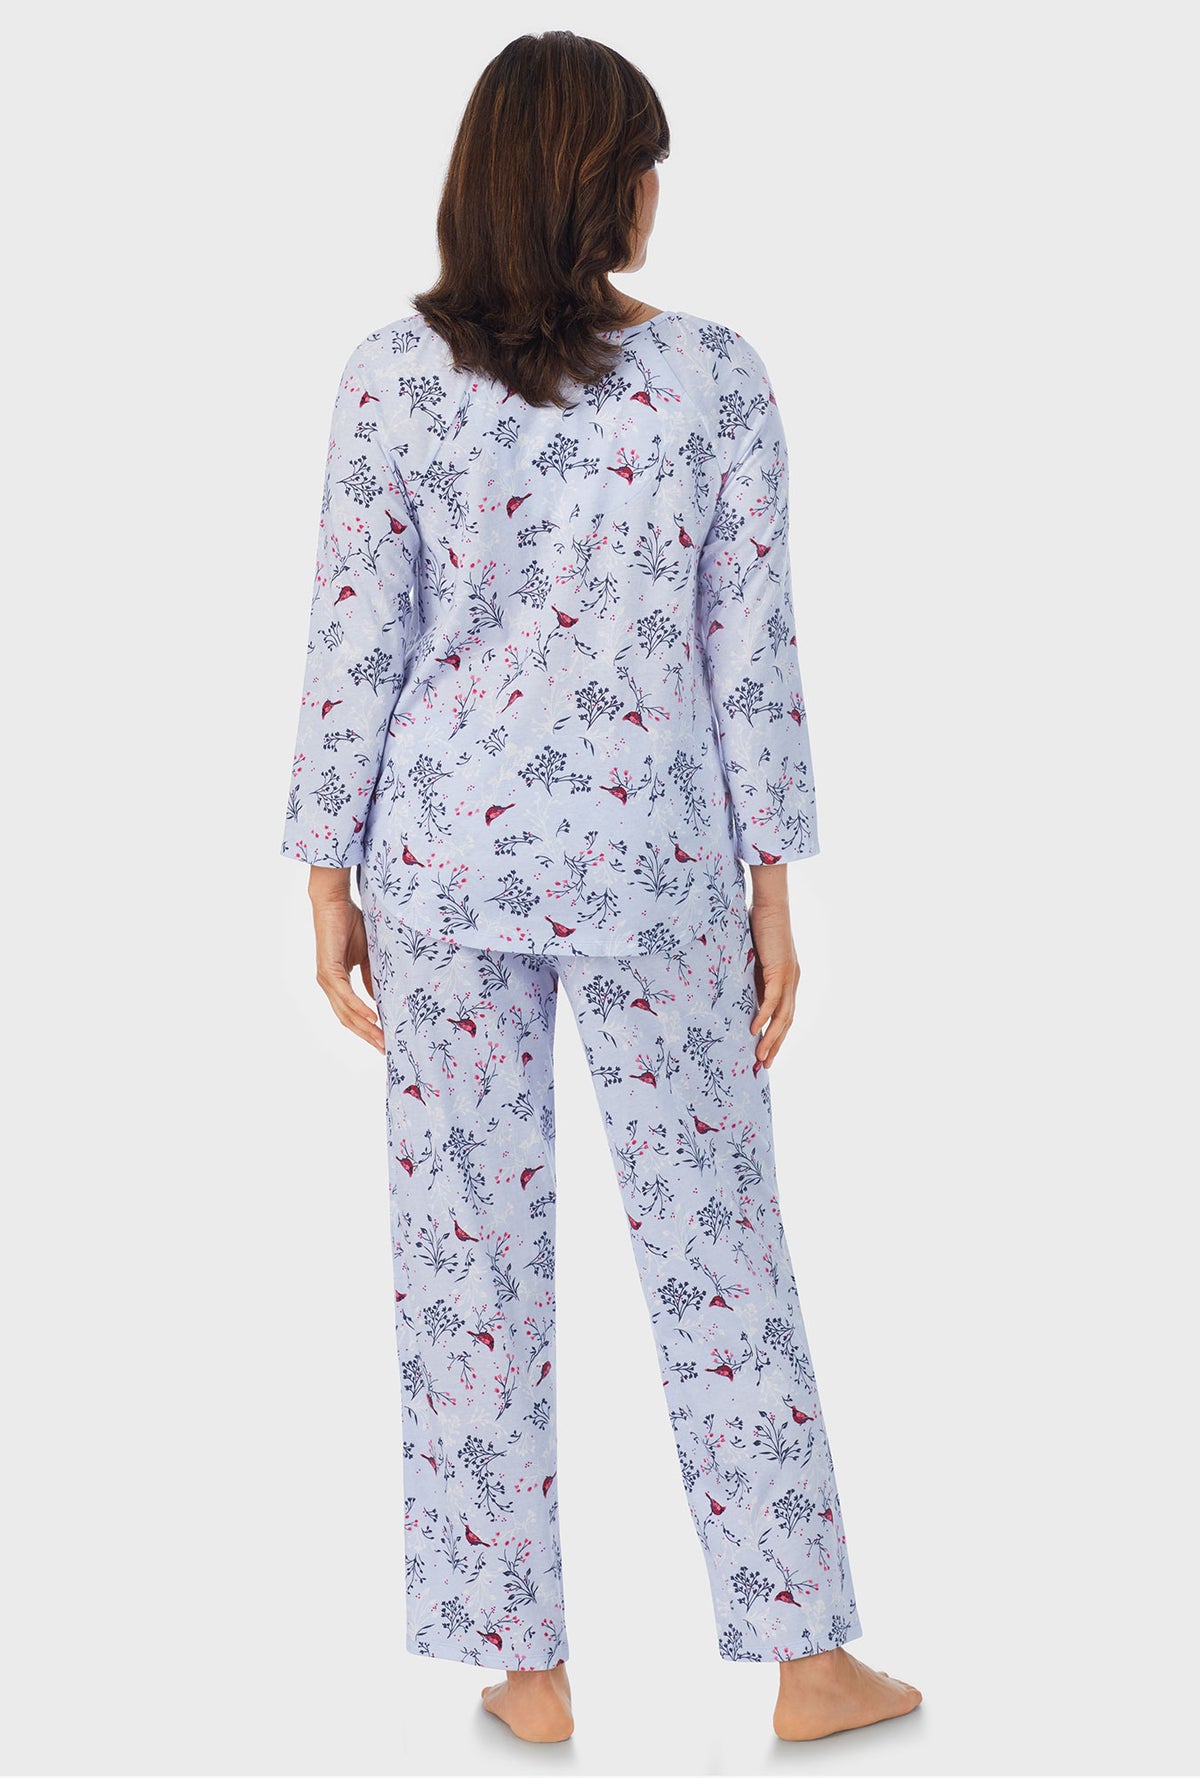 A lady wearing white 3/4 Sleeve Long Pant PJ Set with Winter Blue Cardinal  print